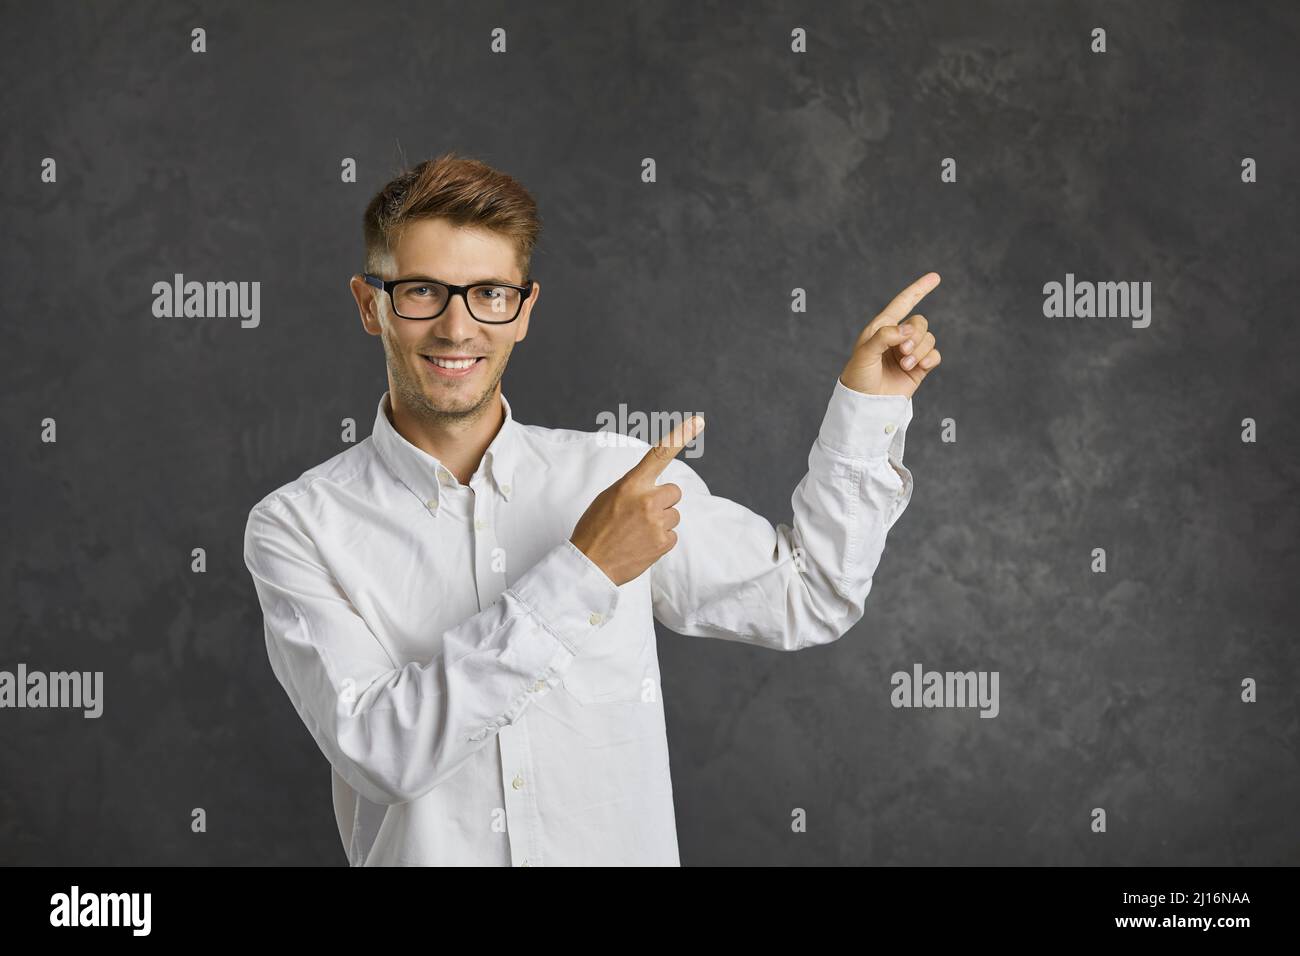 Friendly man with smiling expression points his index fingers to the side on gray background. Stock Photo